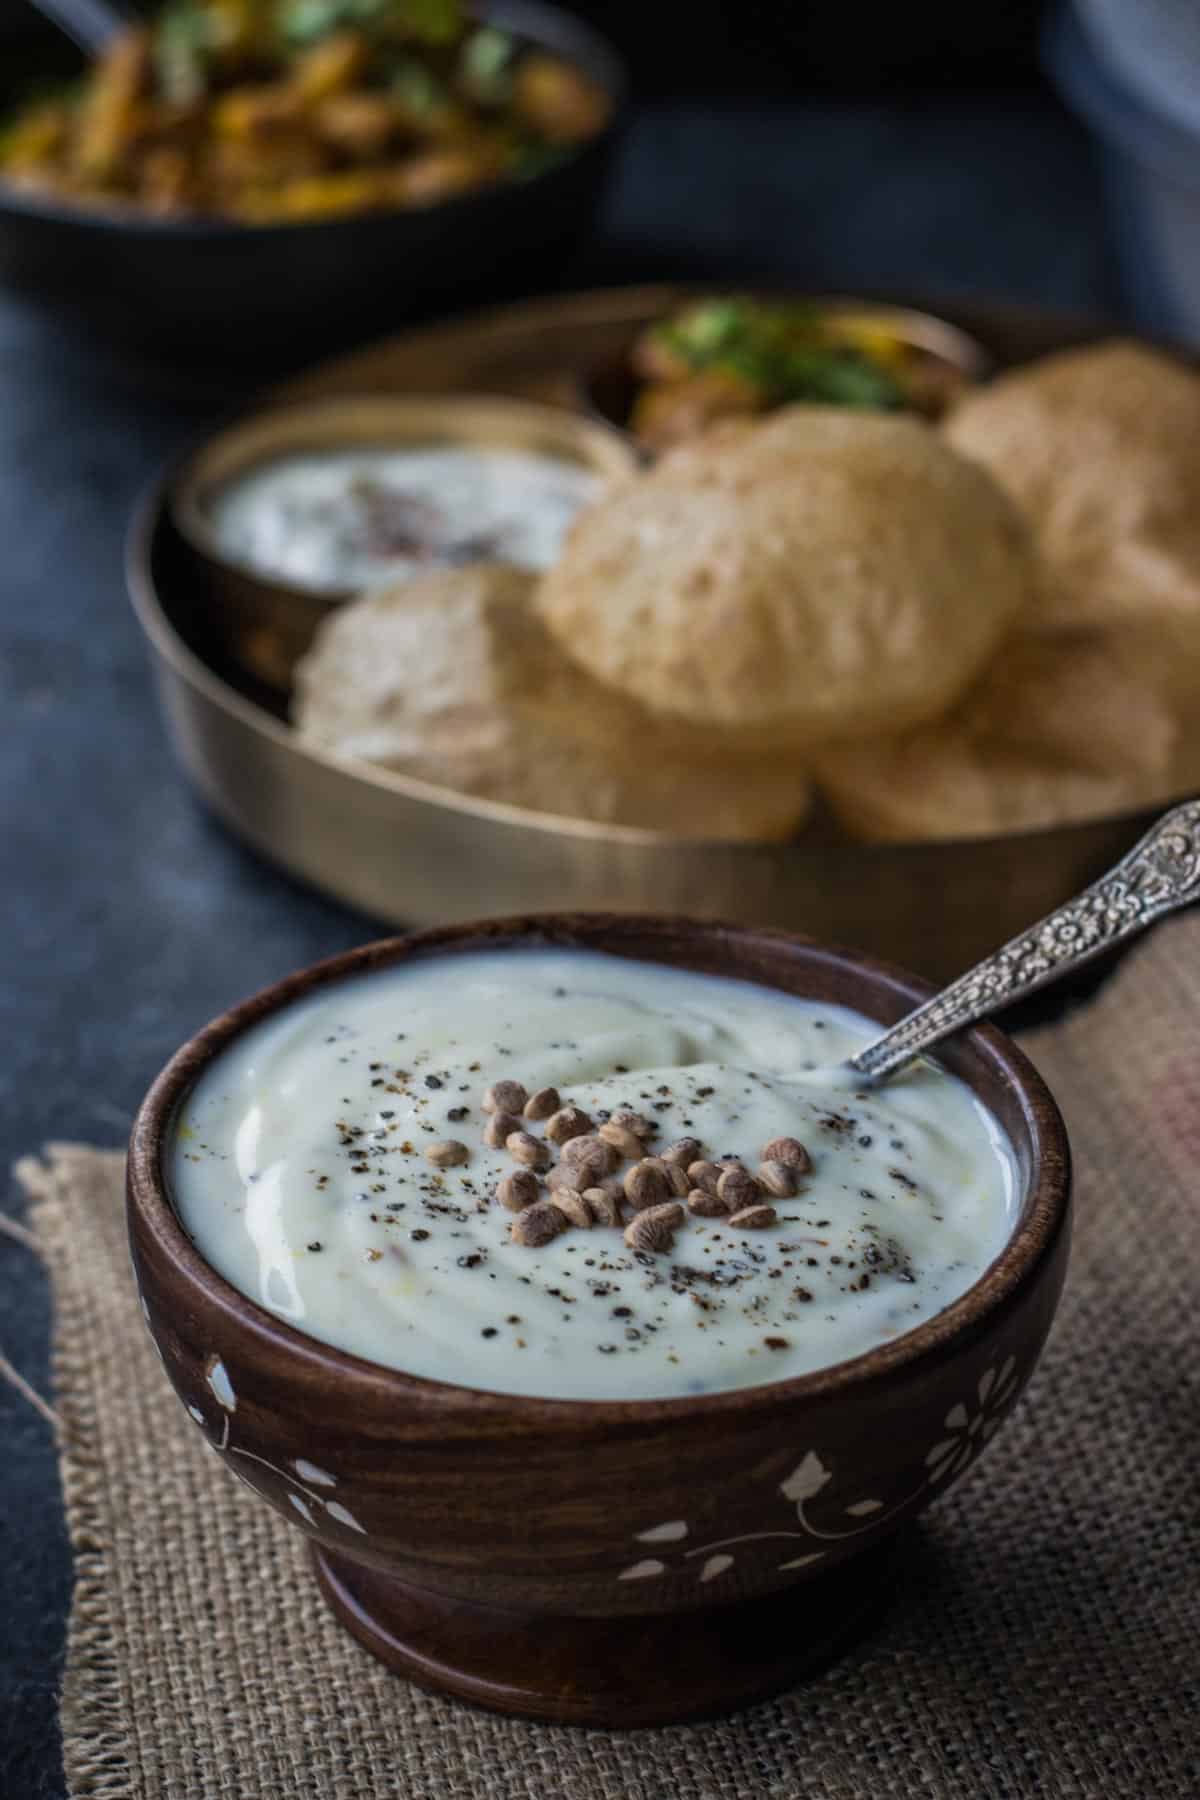 Shrikhand served in a wooden bowl along with pooris served in a golden plate. 